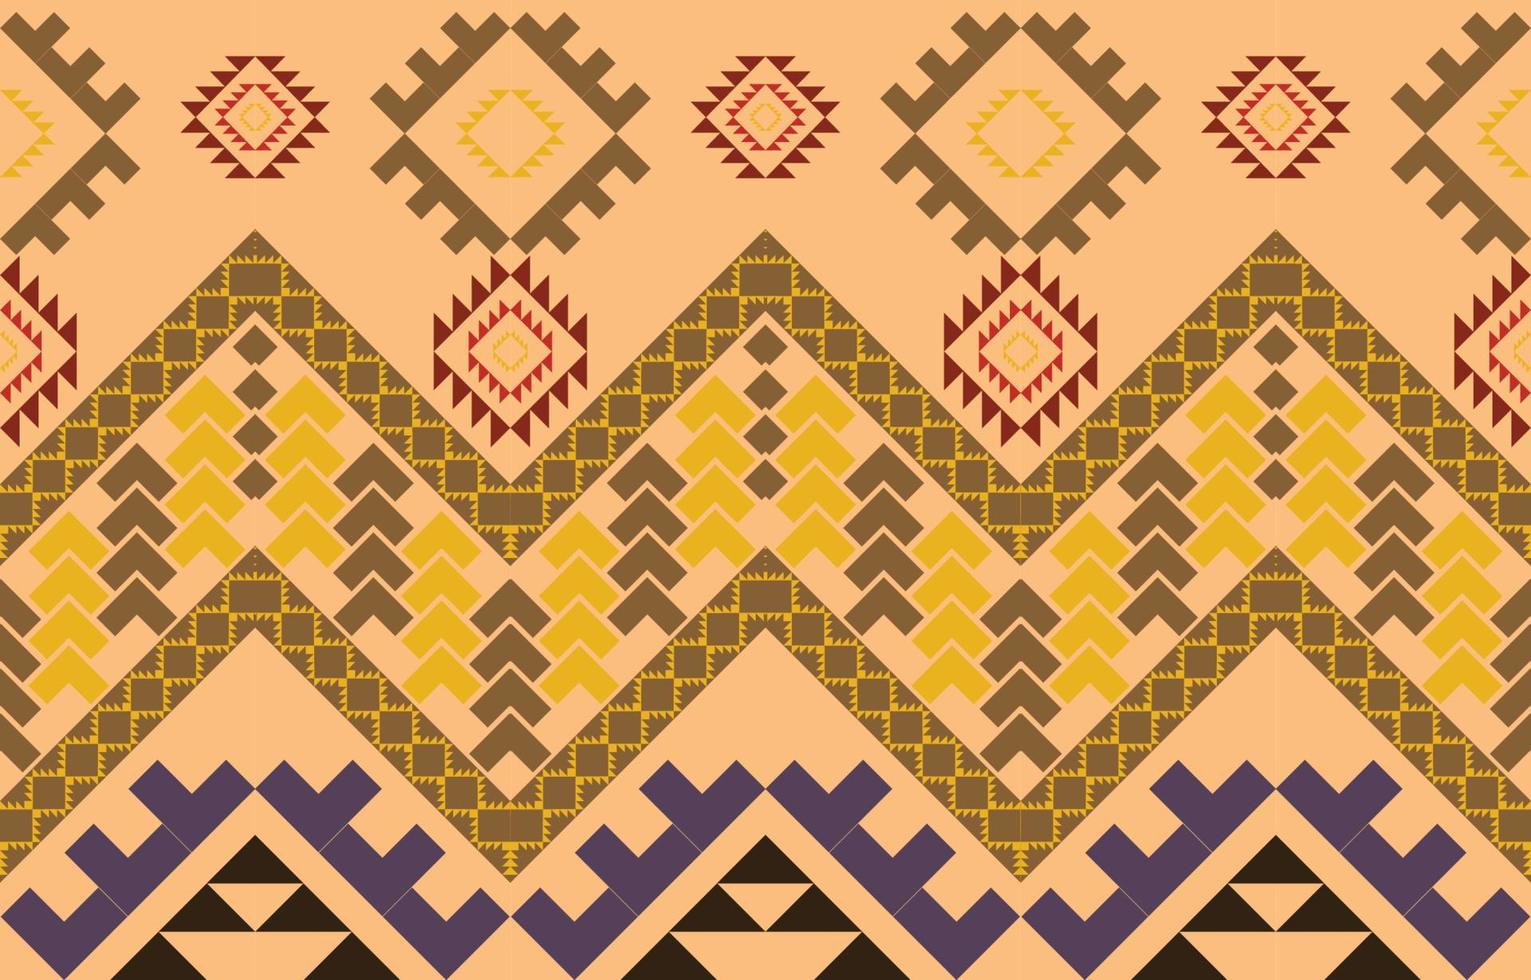 Navajo fabric seamless pattern geometric tribal ethnic traditional background,native American Design Elements, Design for carpet,wallpaper,clothing,rug,interior,Vector illustration embroidery. vector